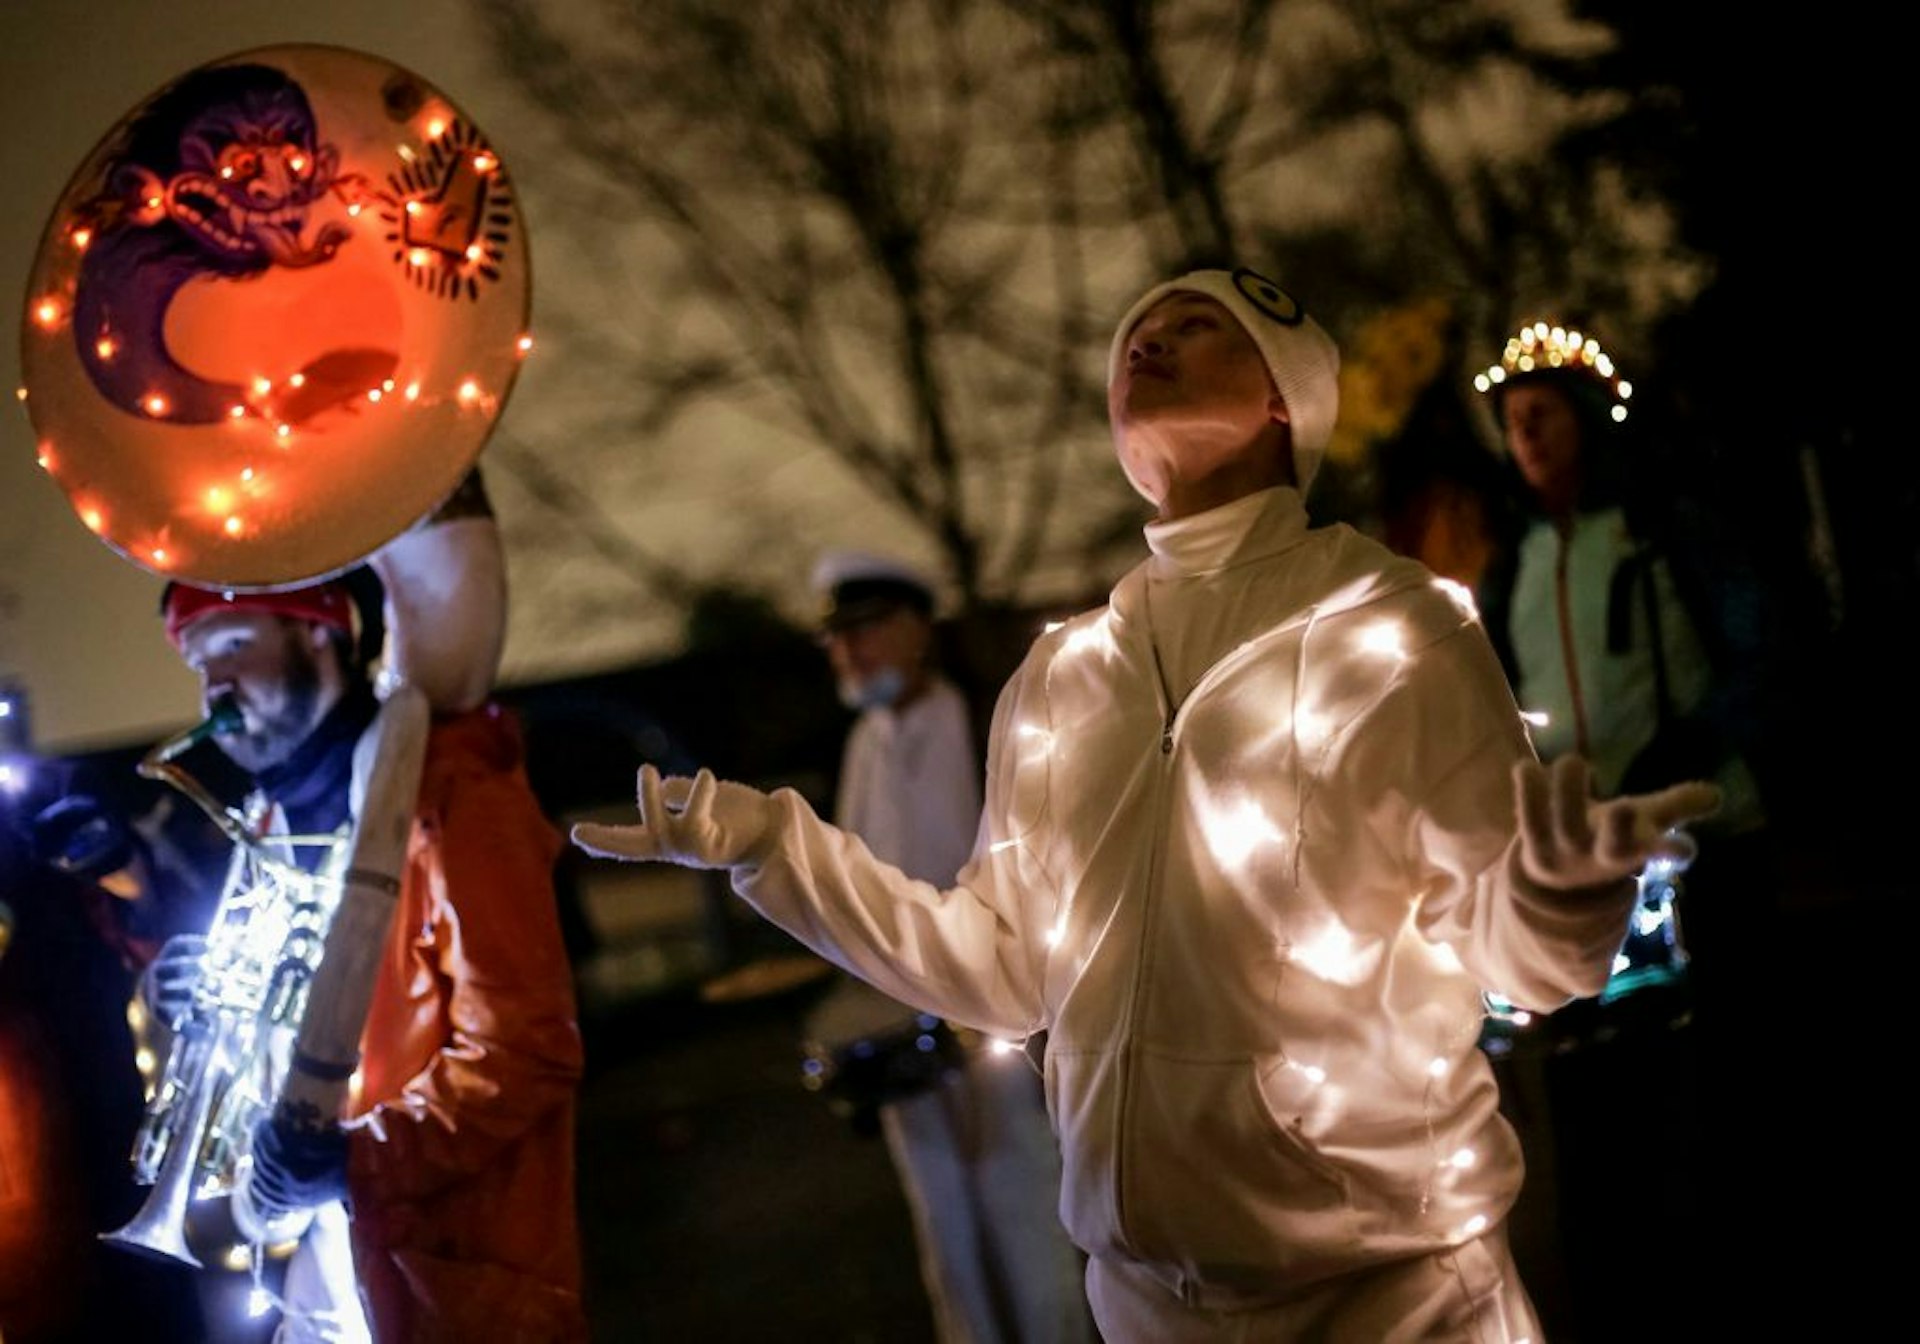 People take part in a lantern festival to welcome the winter solstice in Vancouver, Canada